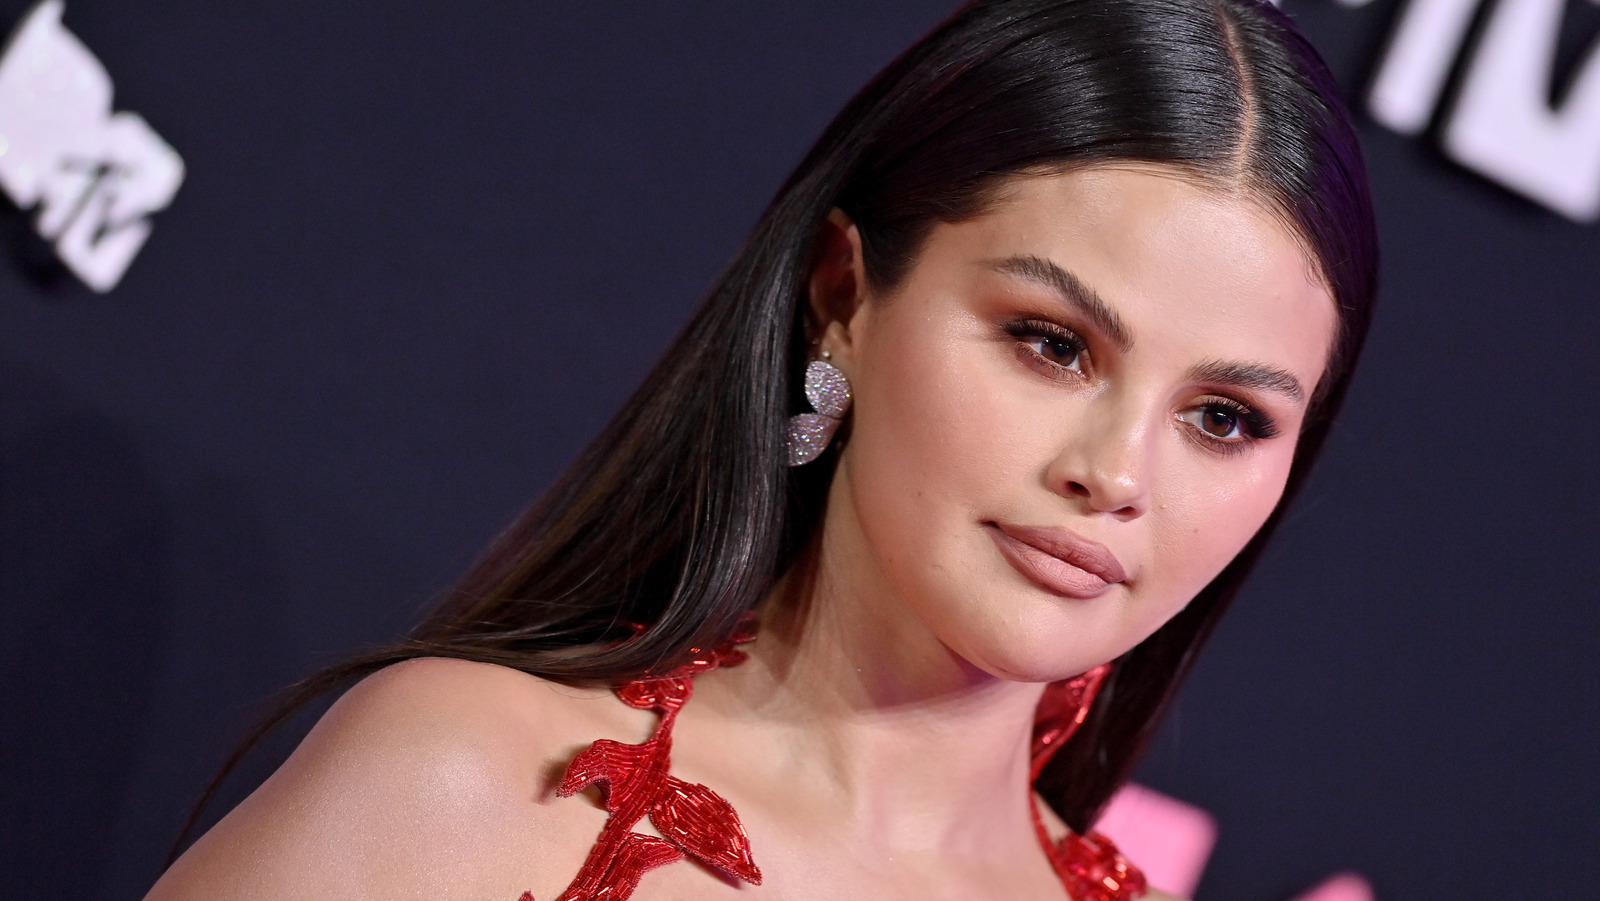 Selena Gomez is 'happy' to be the new face of Louis Vuitton